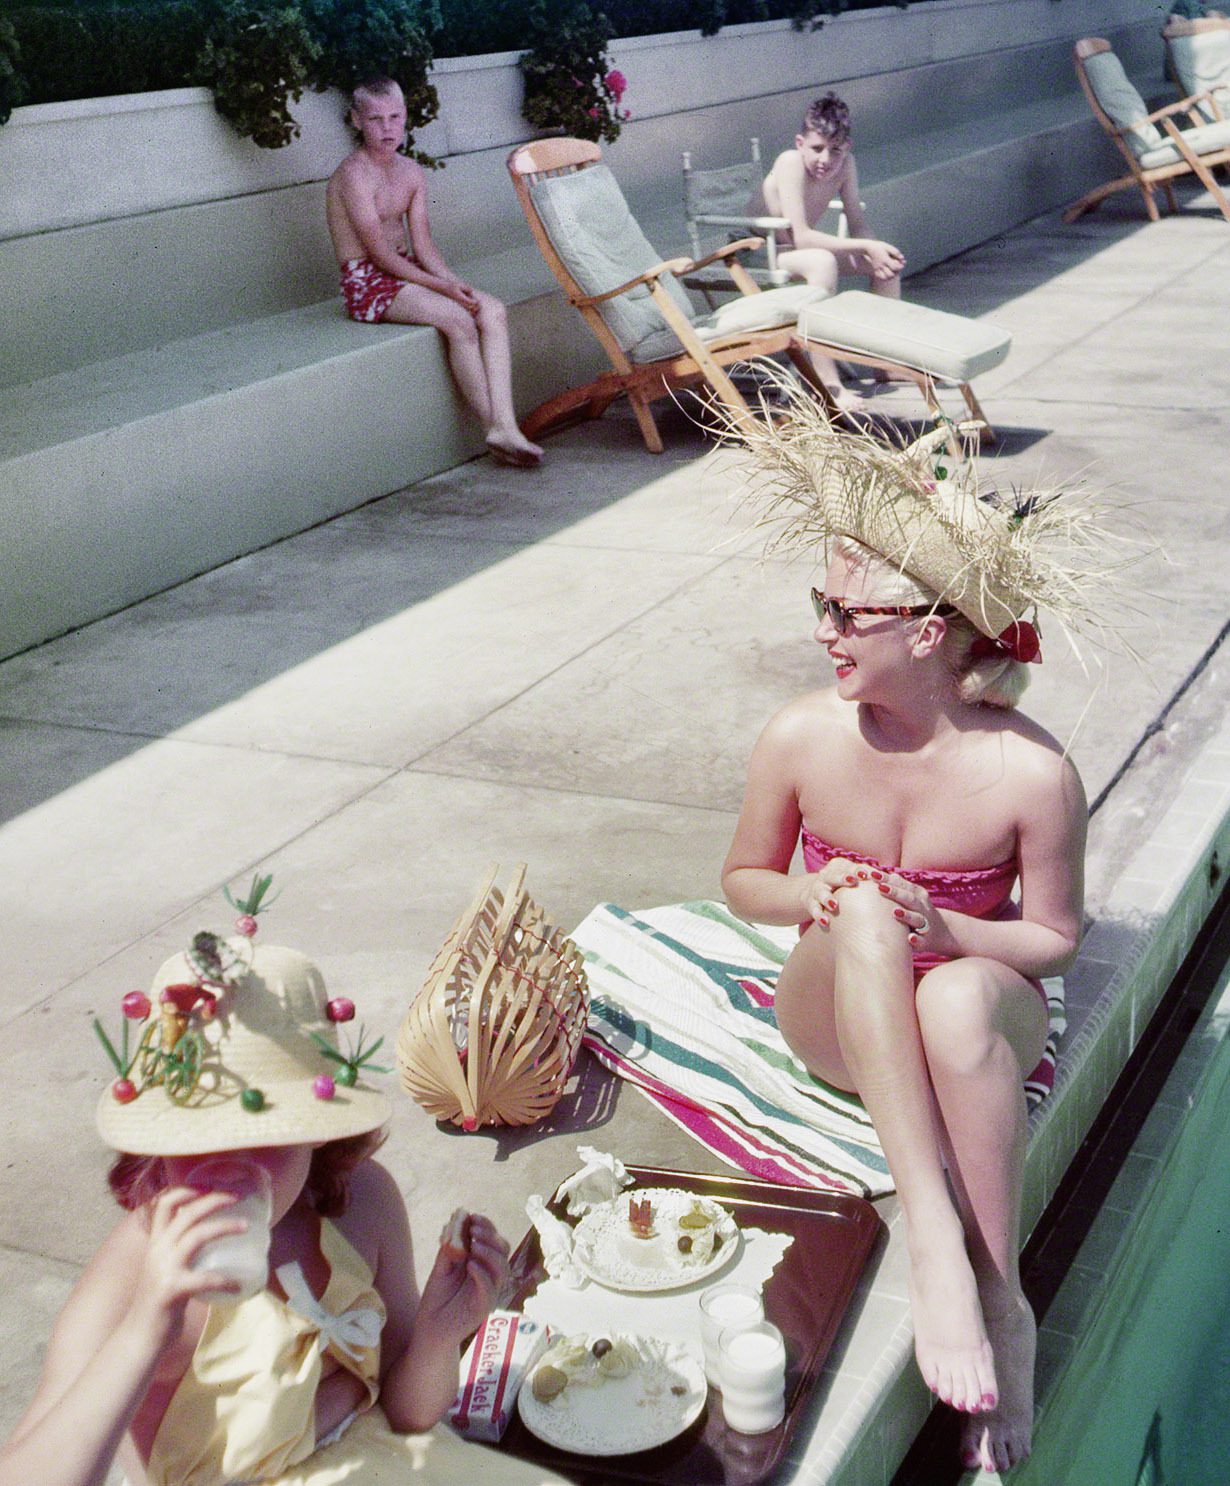 Lana Turner lunching by pool at the Coral Casino